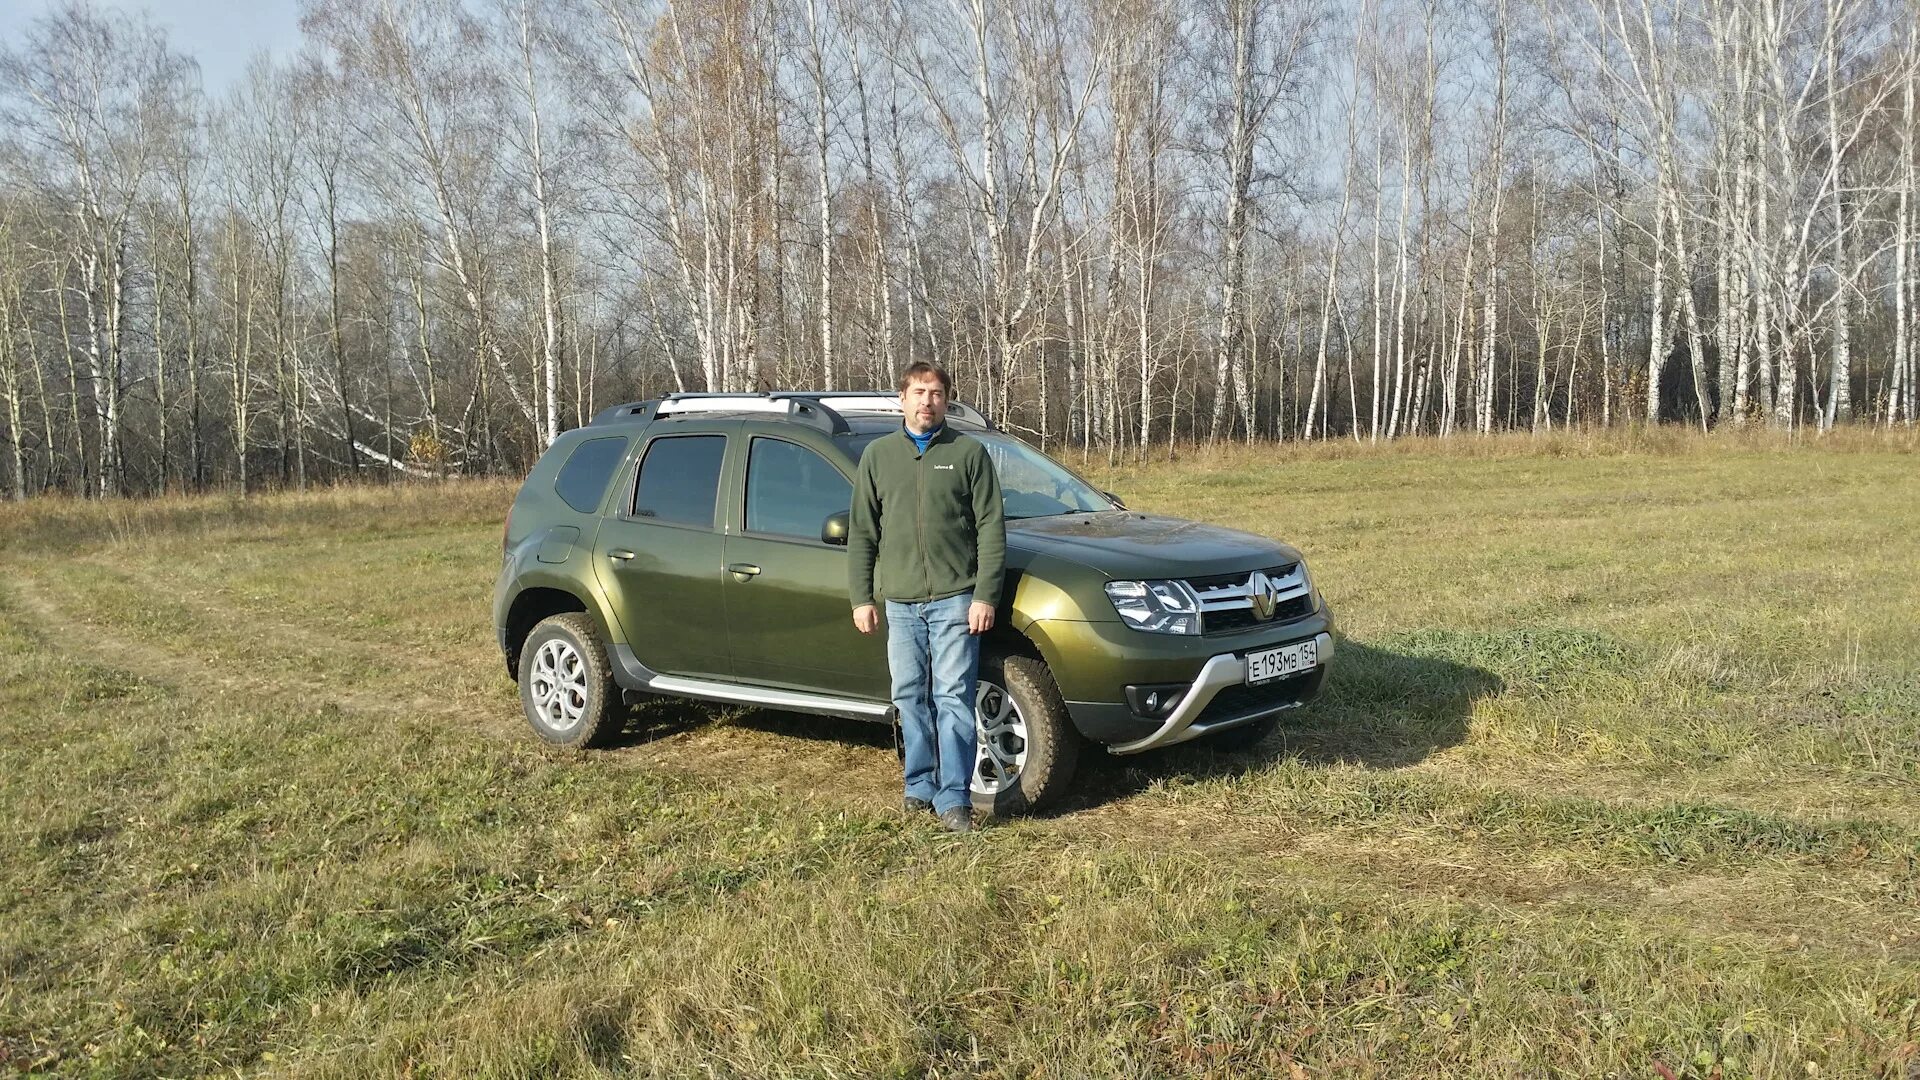 Рено Дастер 2.0 2wd. Рено Дастер 4wd. Renault Duster. 2.0 Ltr 4 WD. Владелец Renault Duster. Рено дастер 2.0 4wd